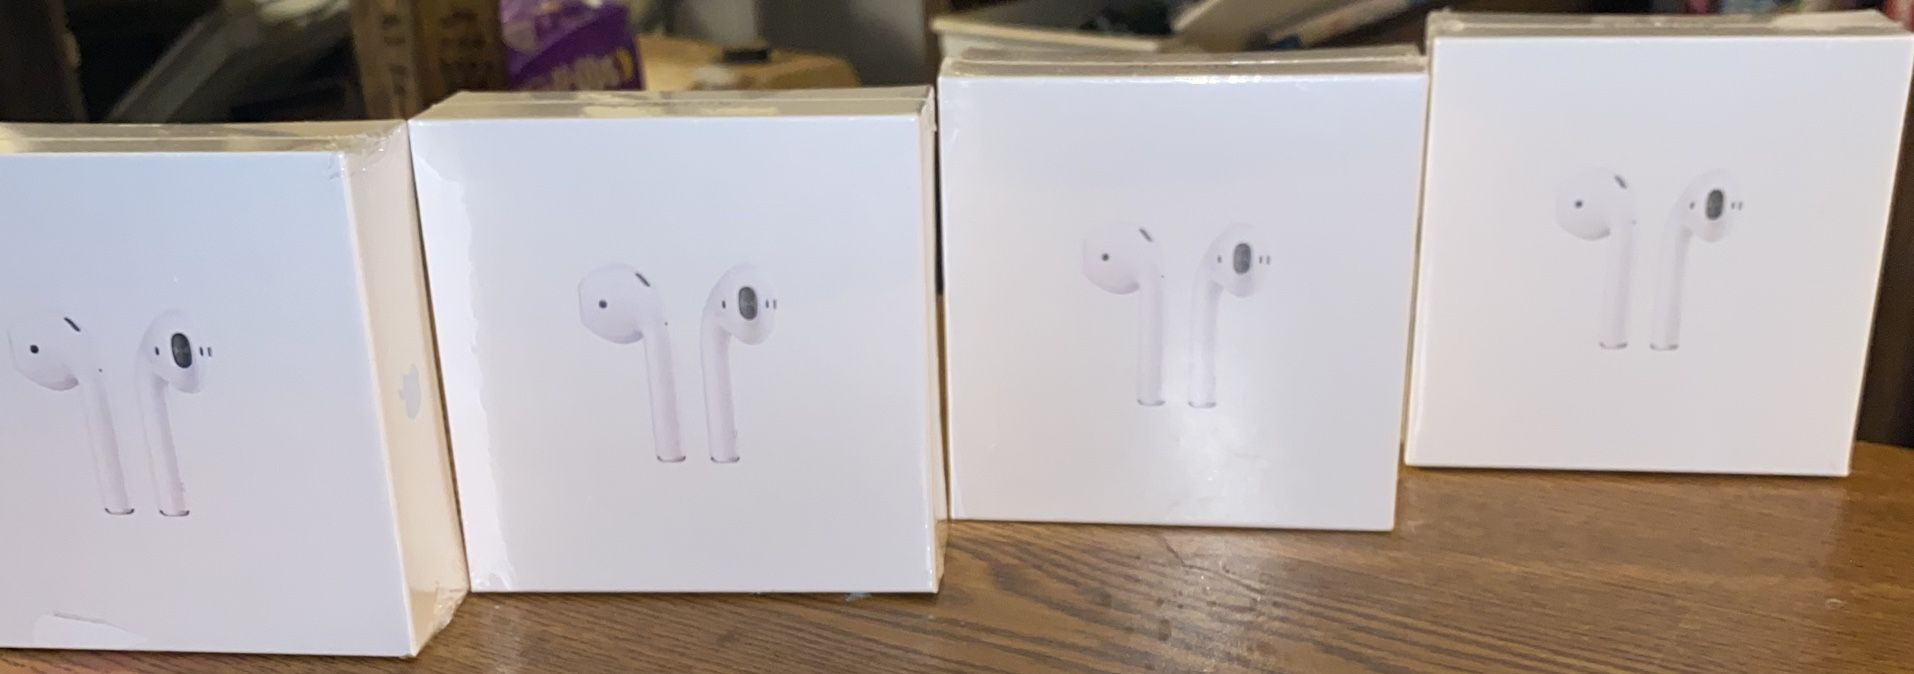 $60 Each Gen 1 AirPods Brand New Out The Box wireless Charging Case